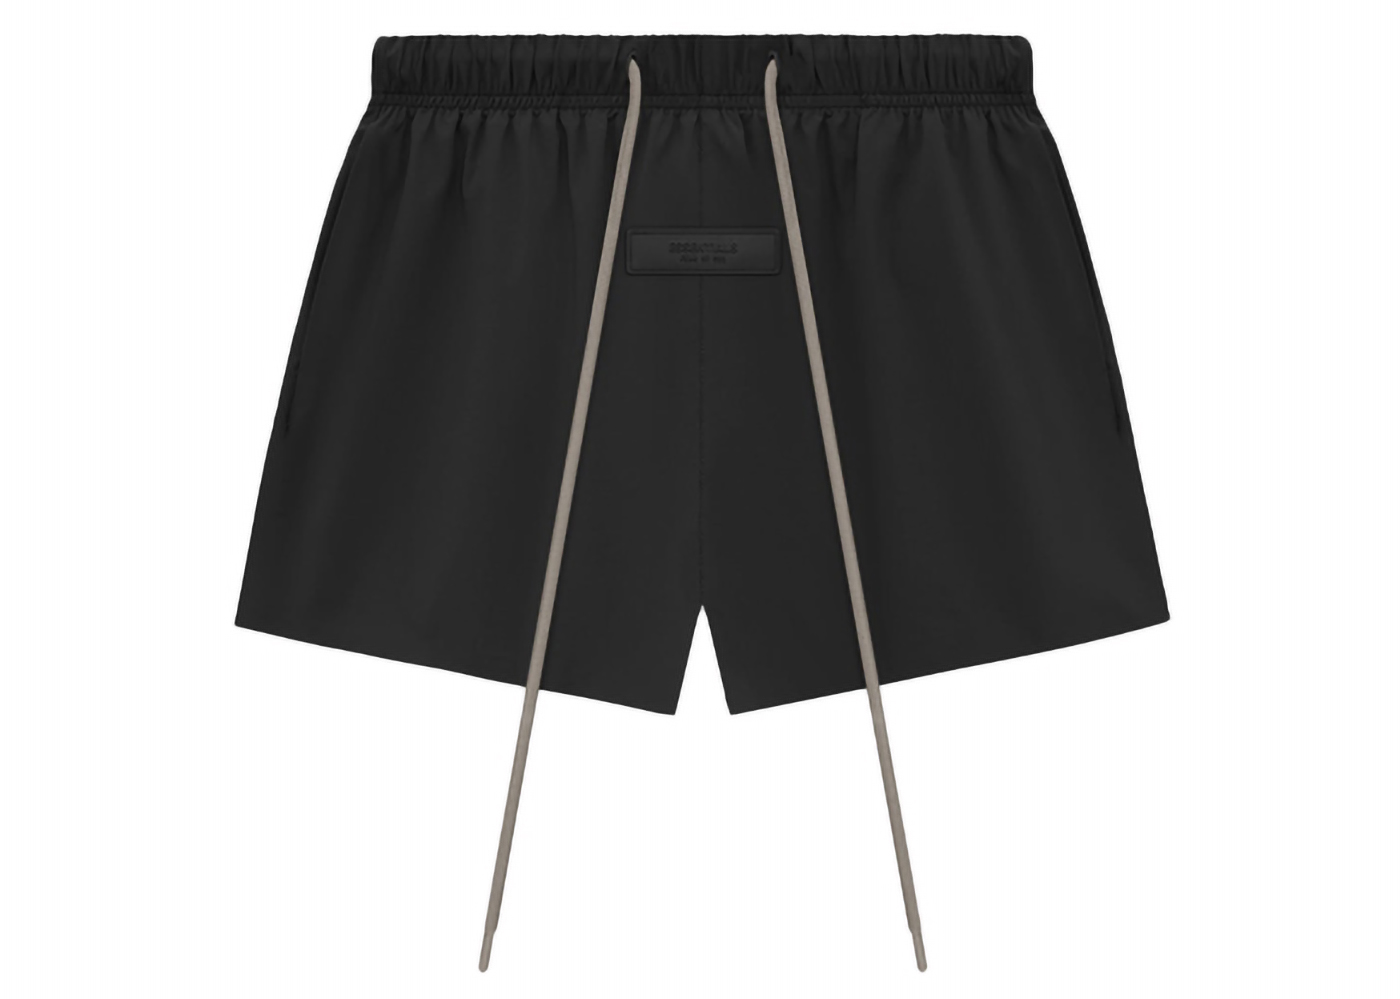 Fear of God Essentials Core Collection Women's Nylon Running Short 